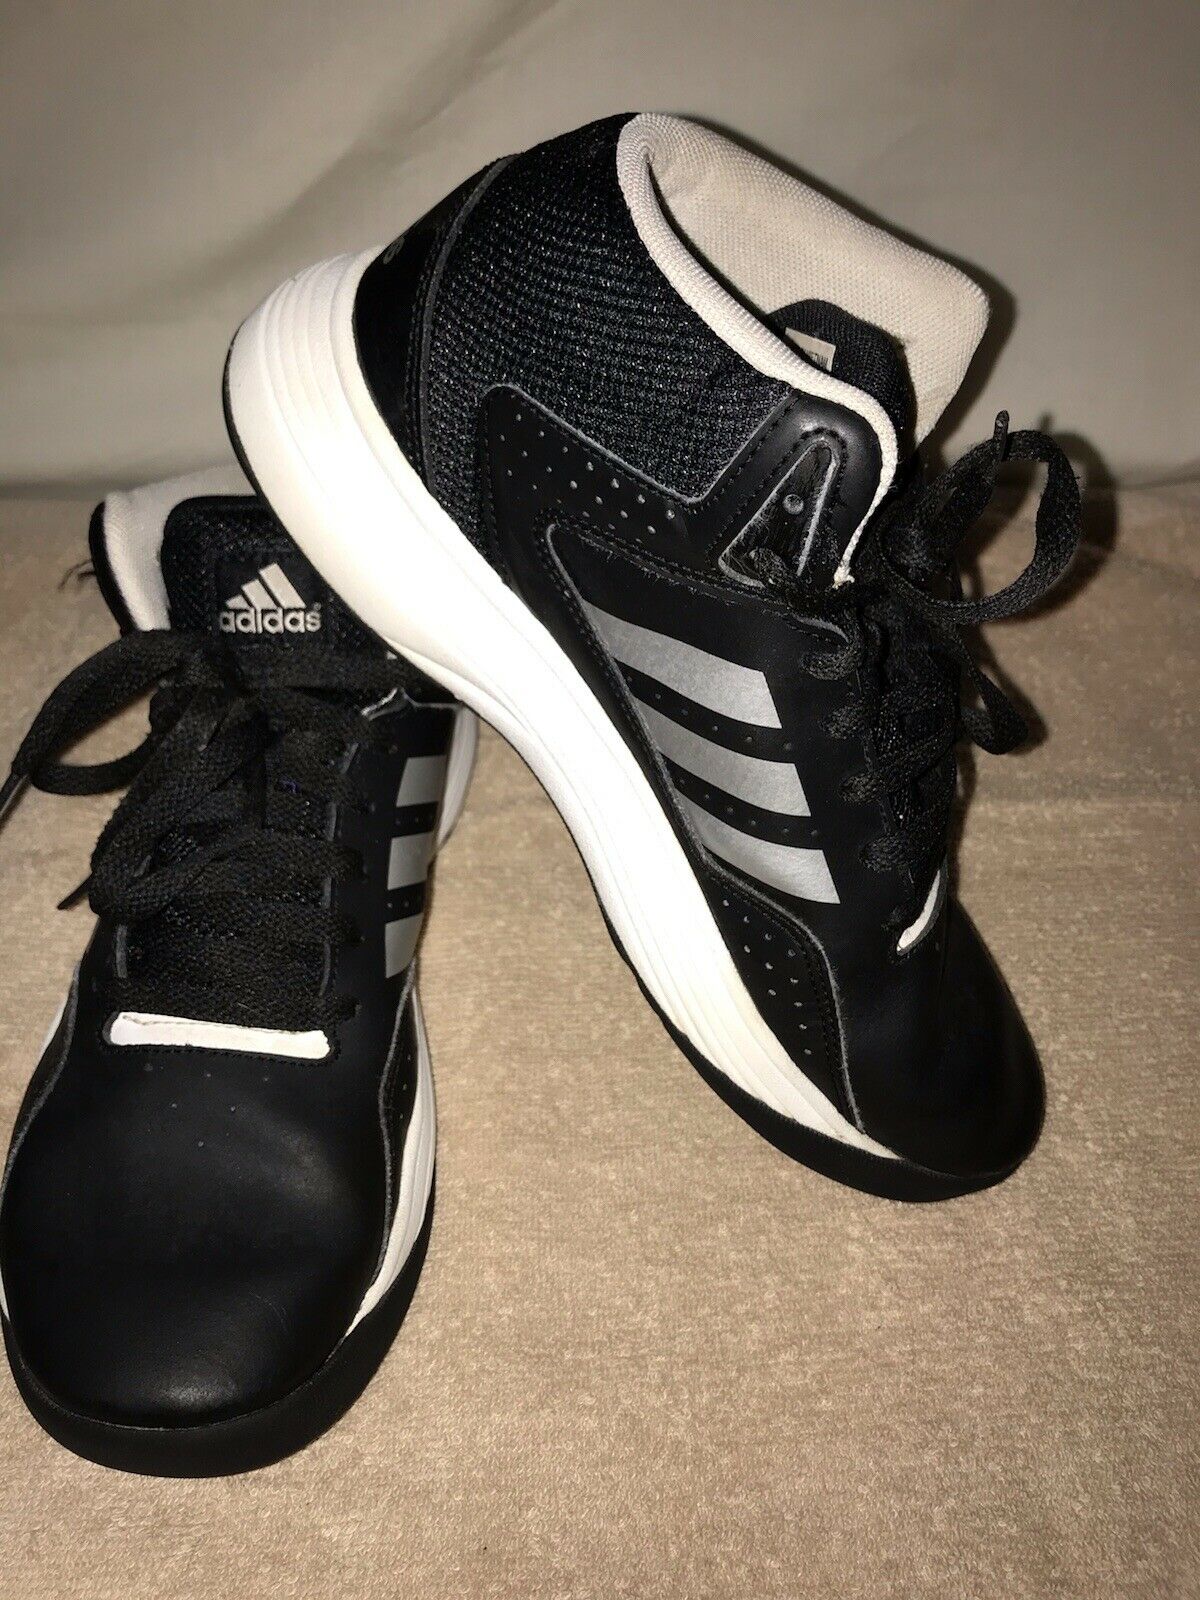 adidas cloudfoam athletic shoes Y size 6 pre-owned